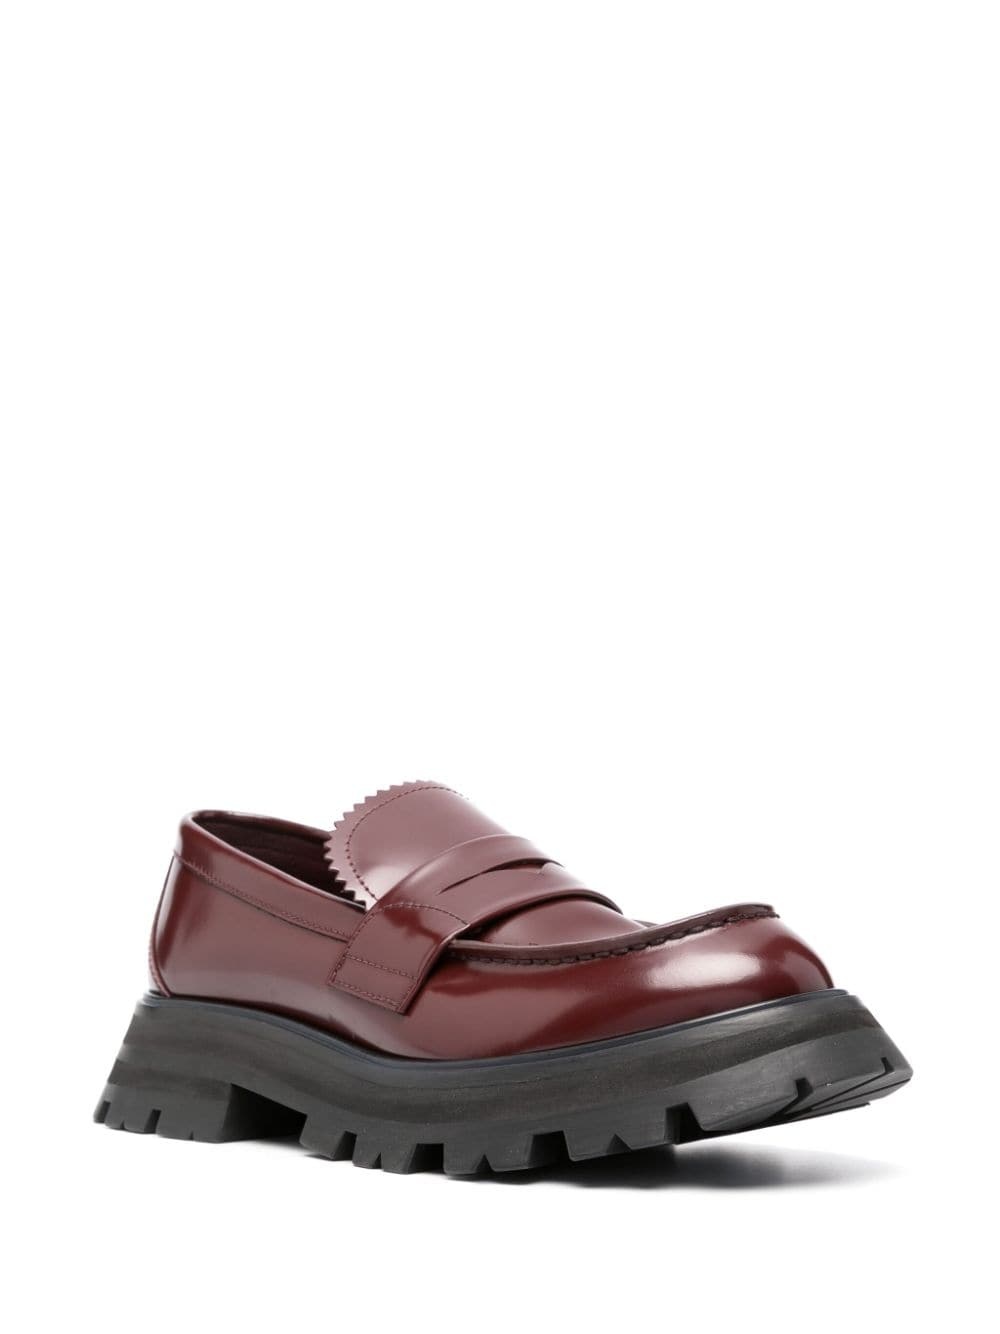 ridged-sole leather loafers - 2